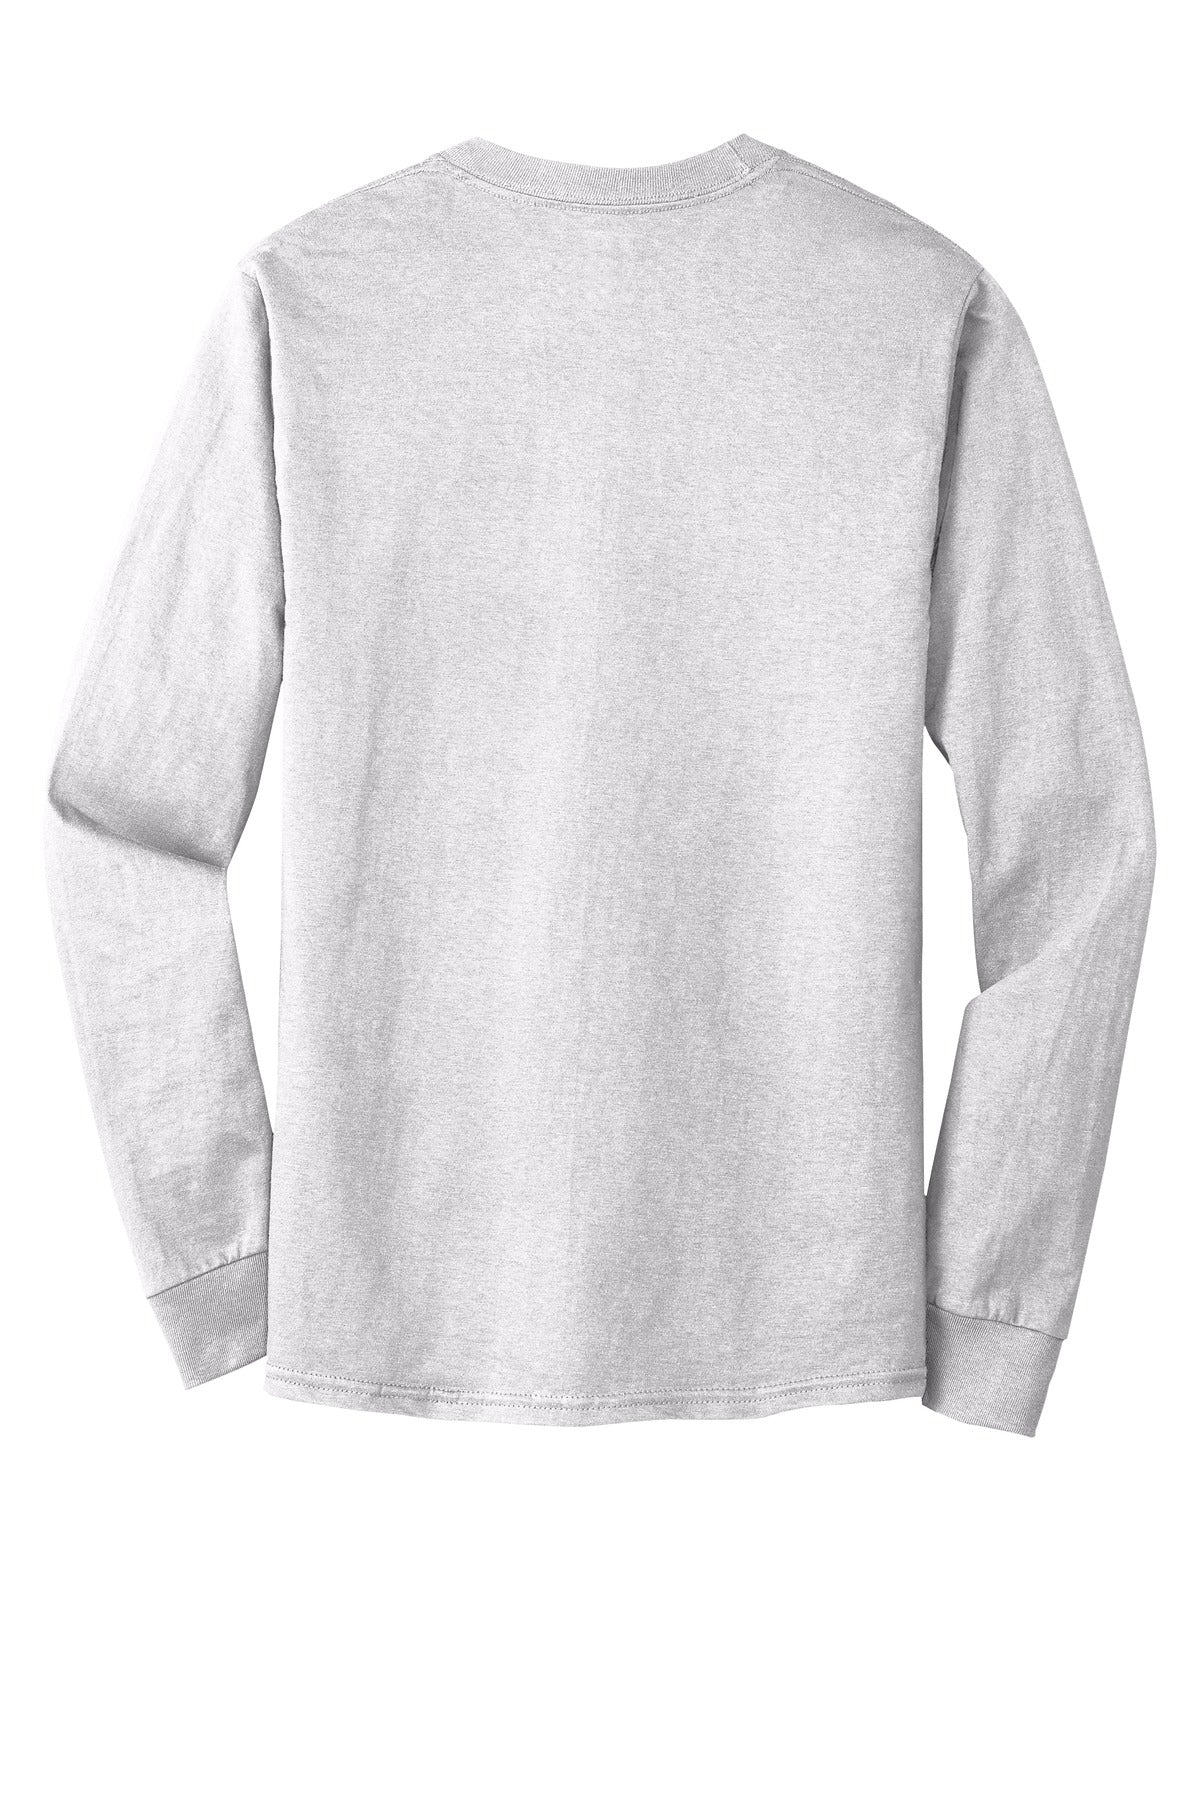 Hanes Beefy-T - 100% Cotton Long Sleeve T-Shirt. 5186